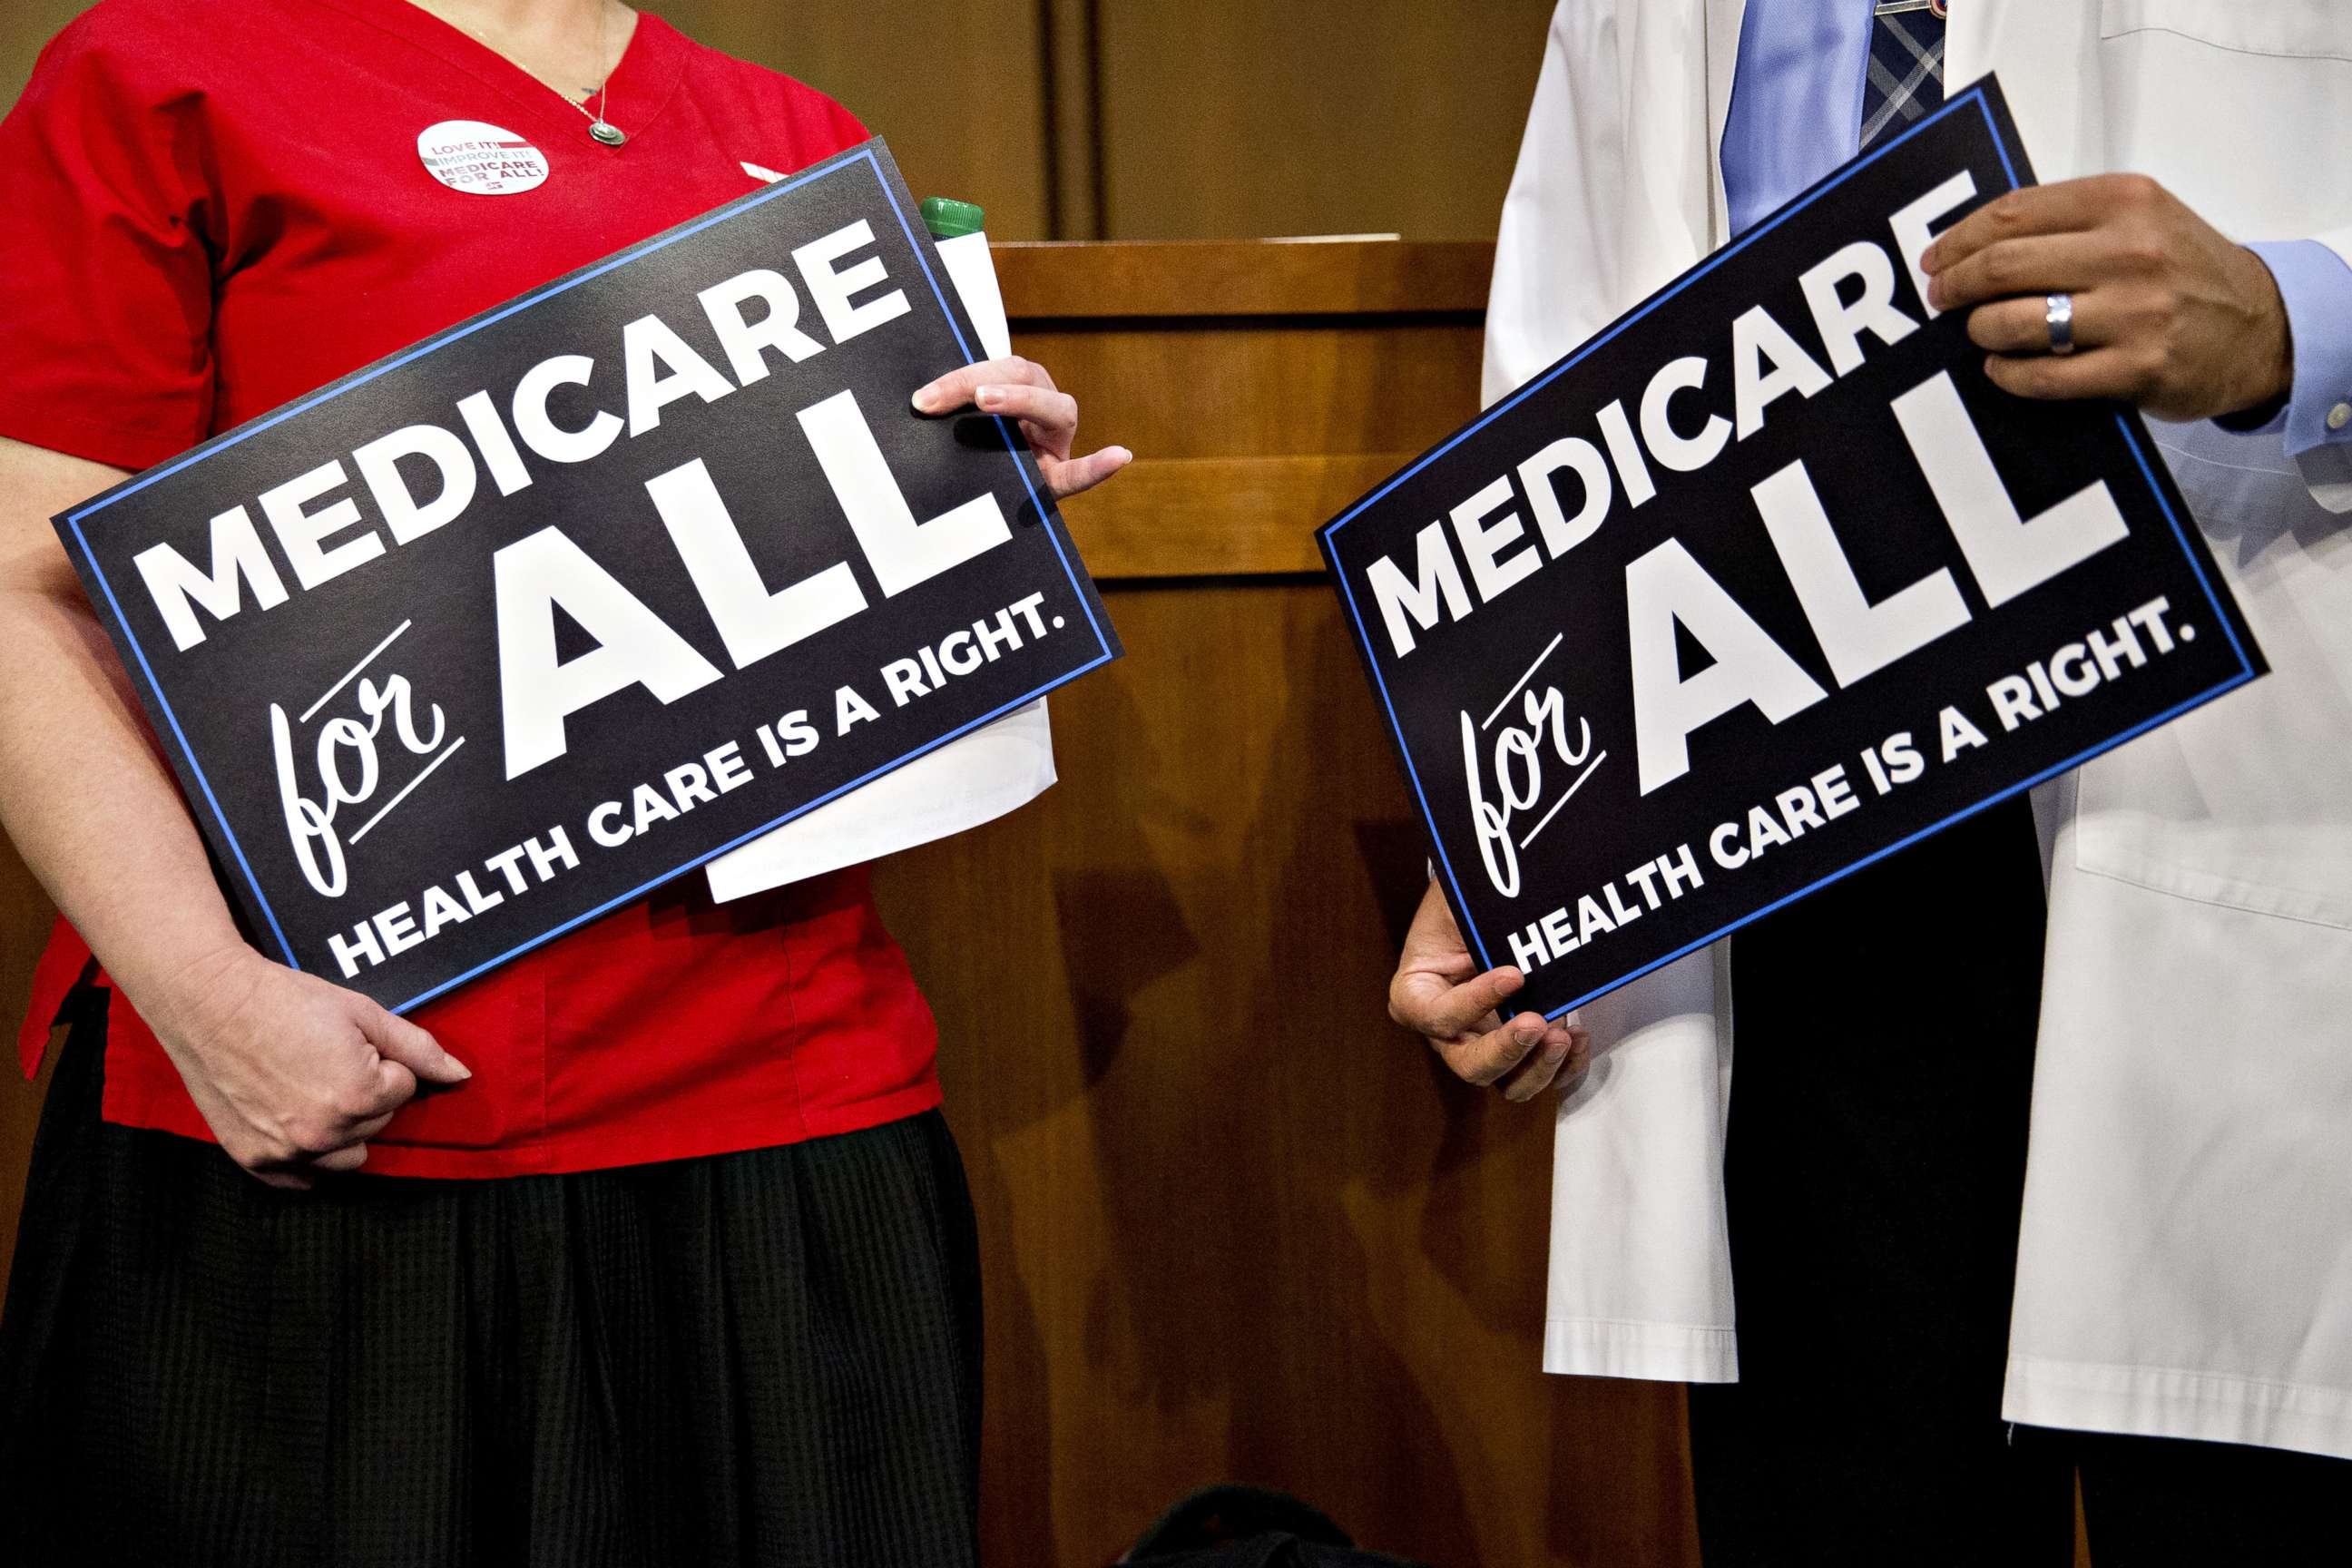 PHOTO: Attendees hold signs while waiting for a health care bill news conference to begin on Capitol Hill in Washington, Sept. 13, 2017.